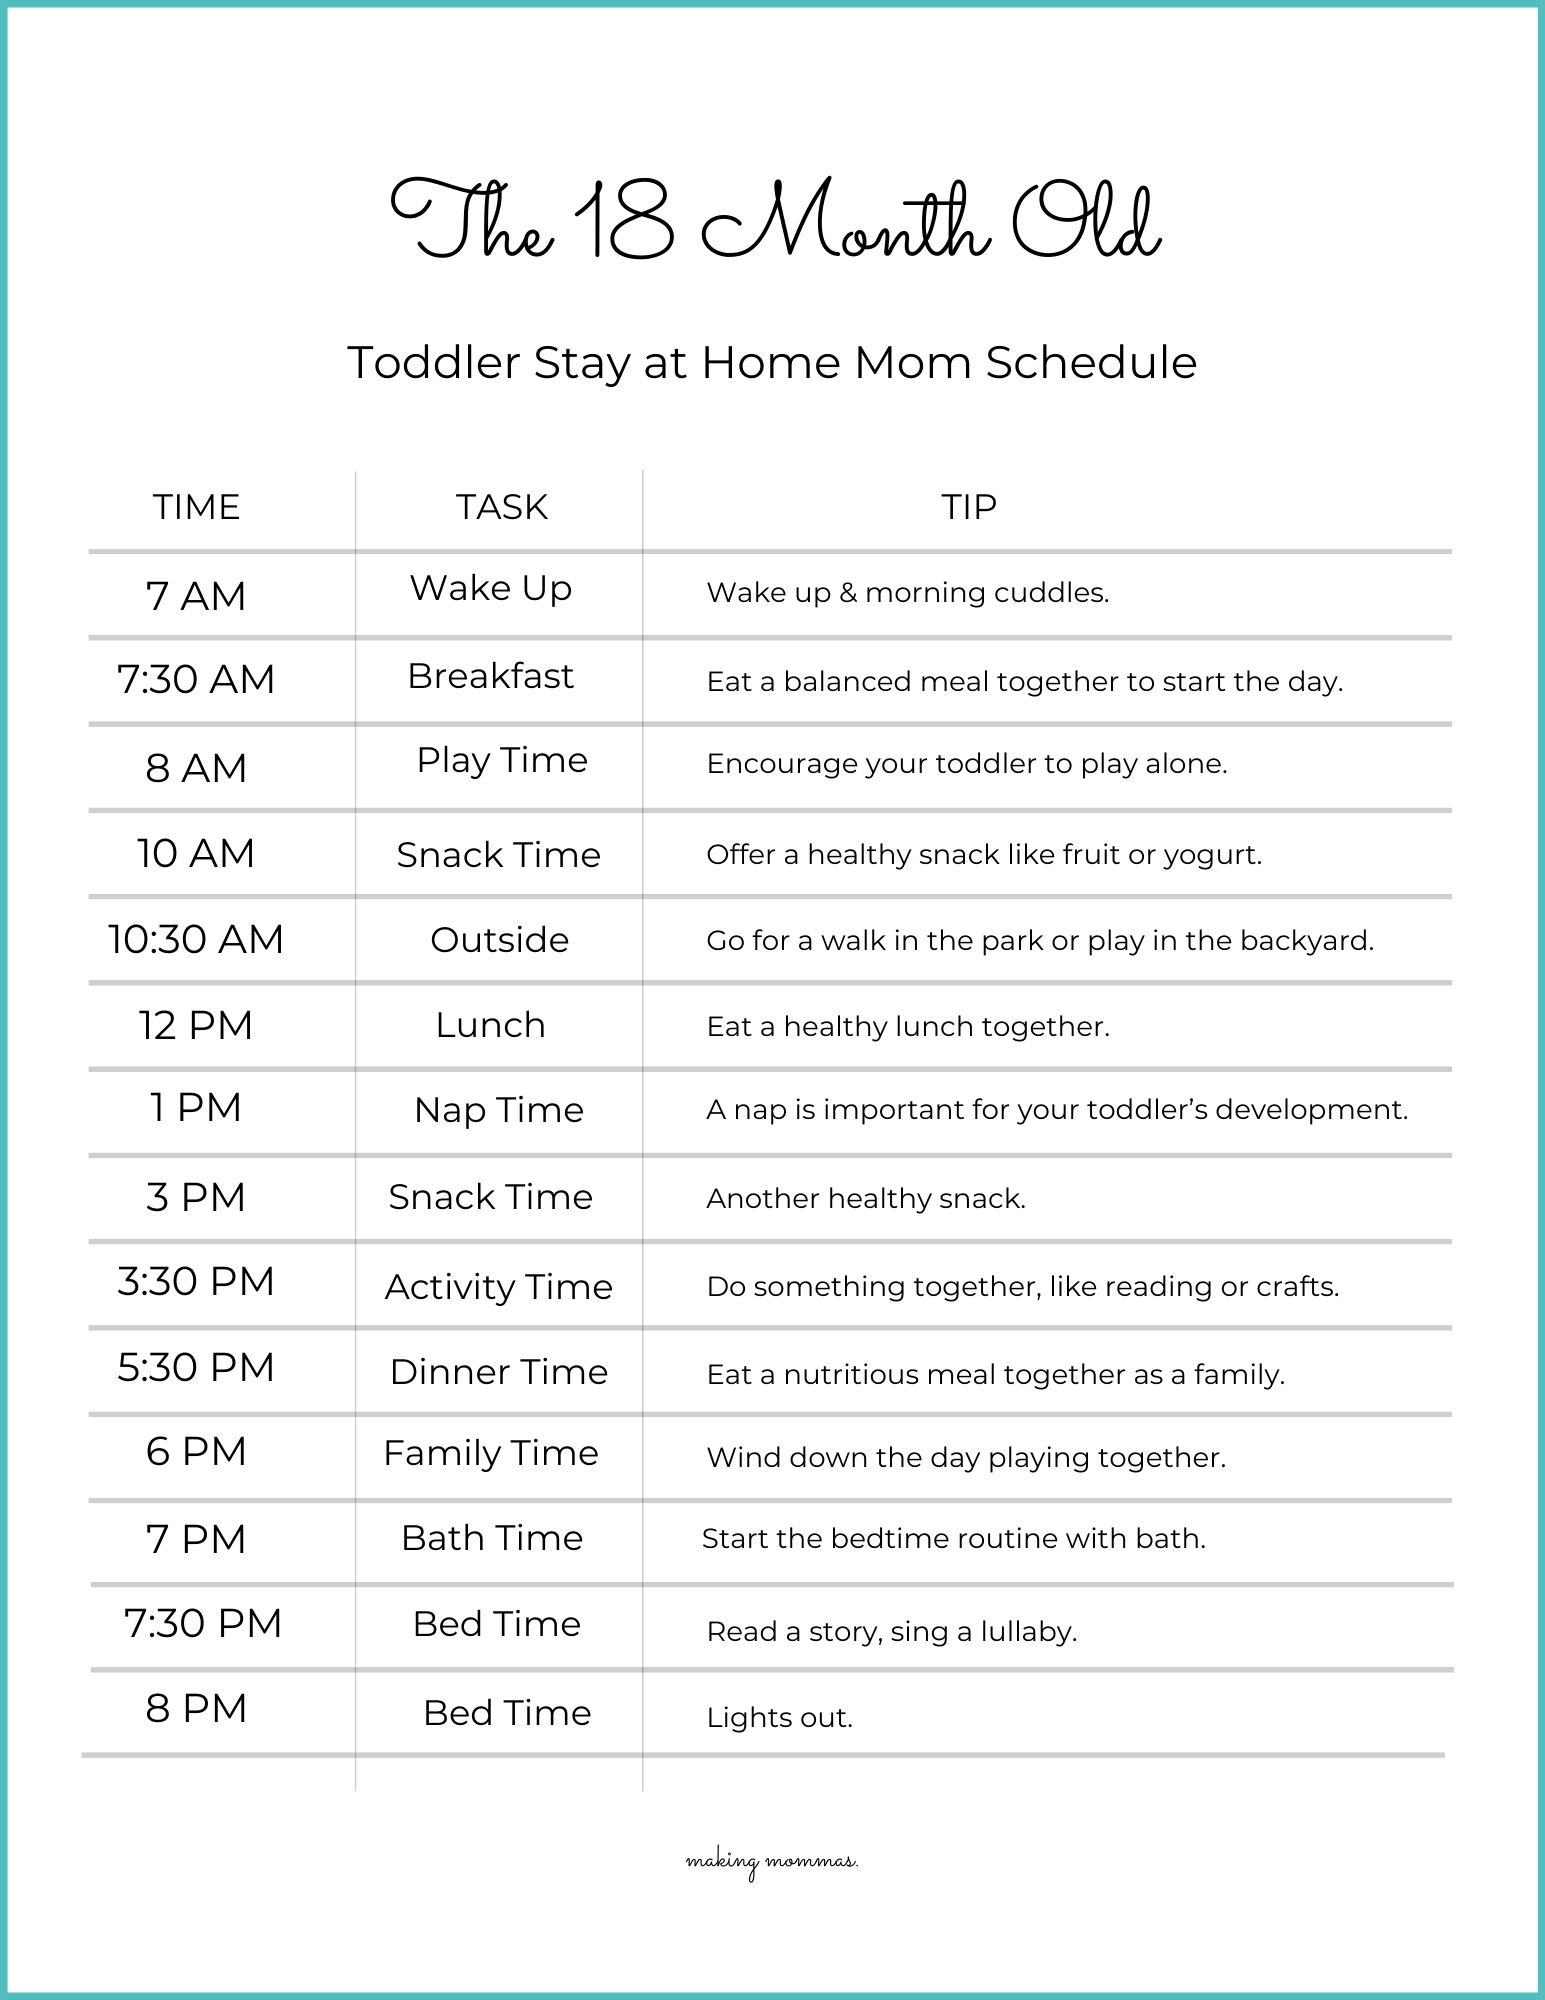 pin image of a sample 18 month old toddler stay at home mom schedule